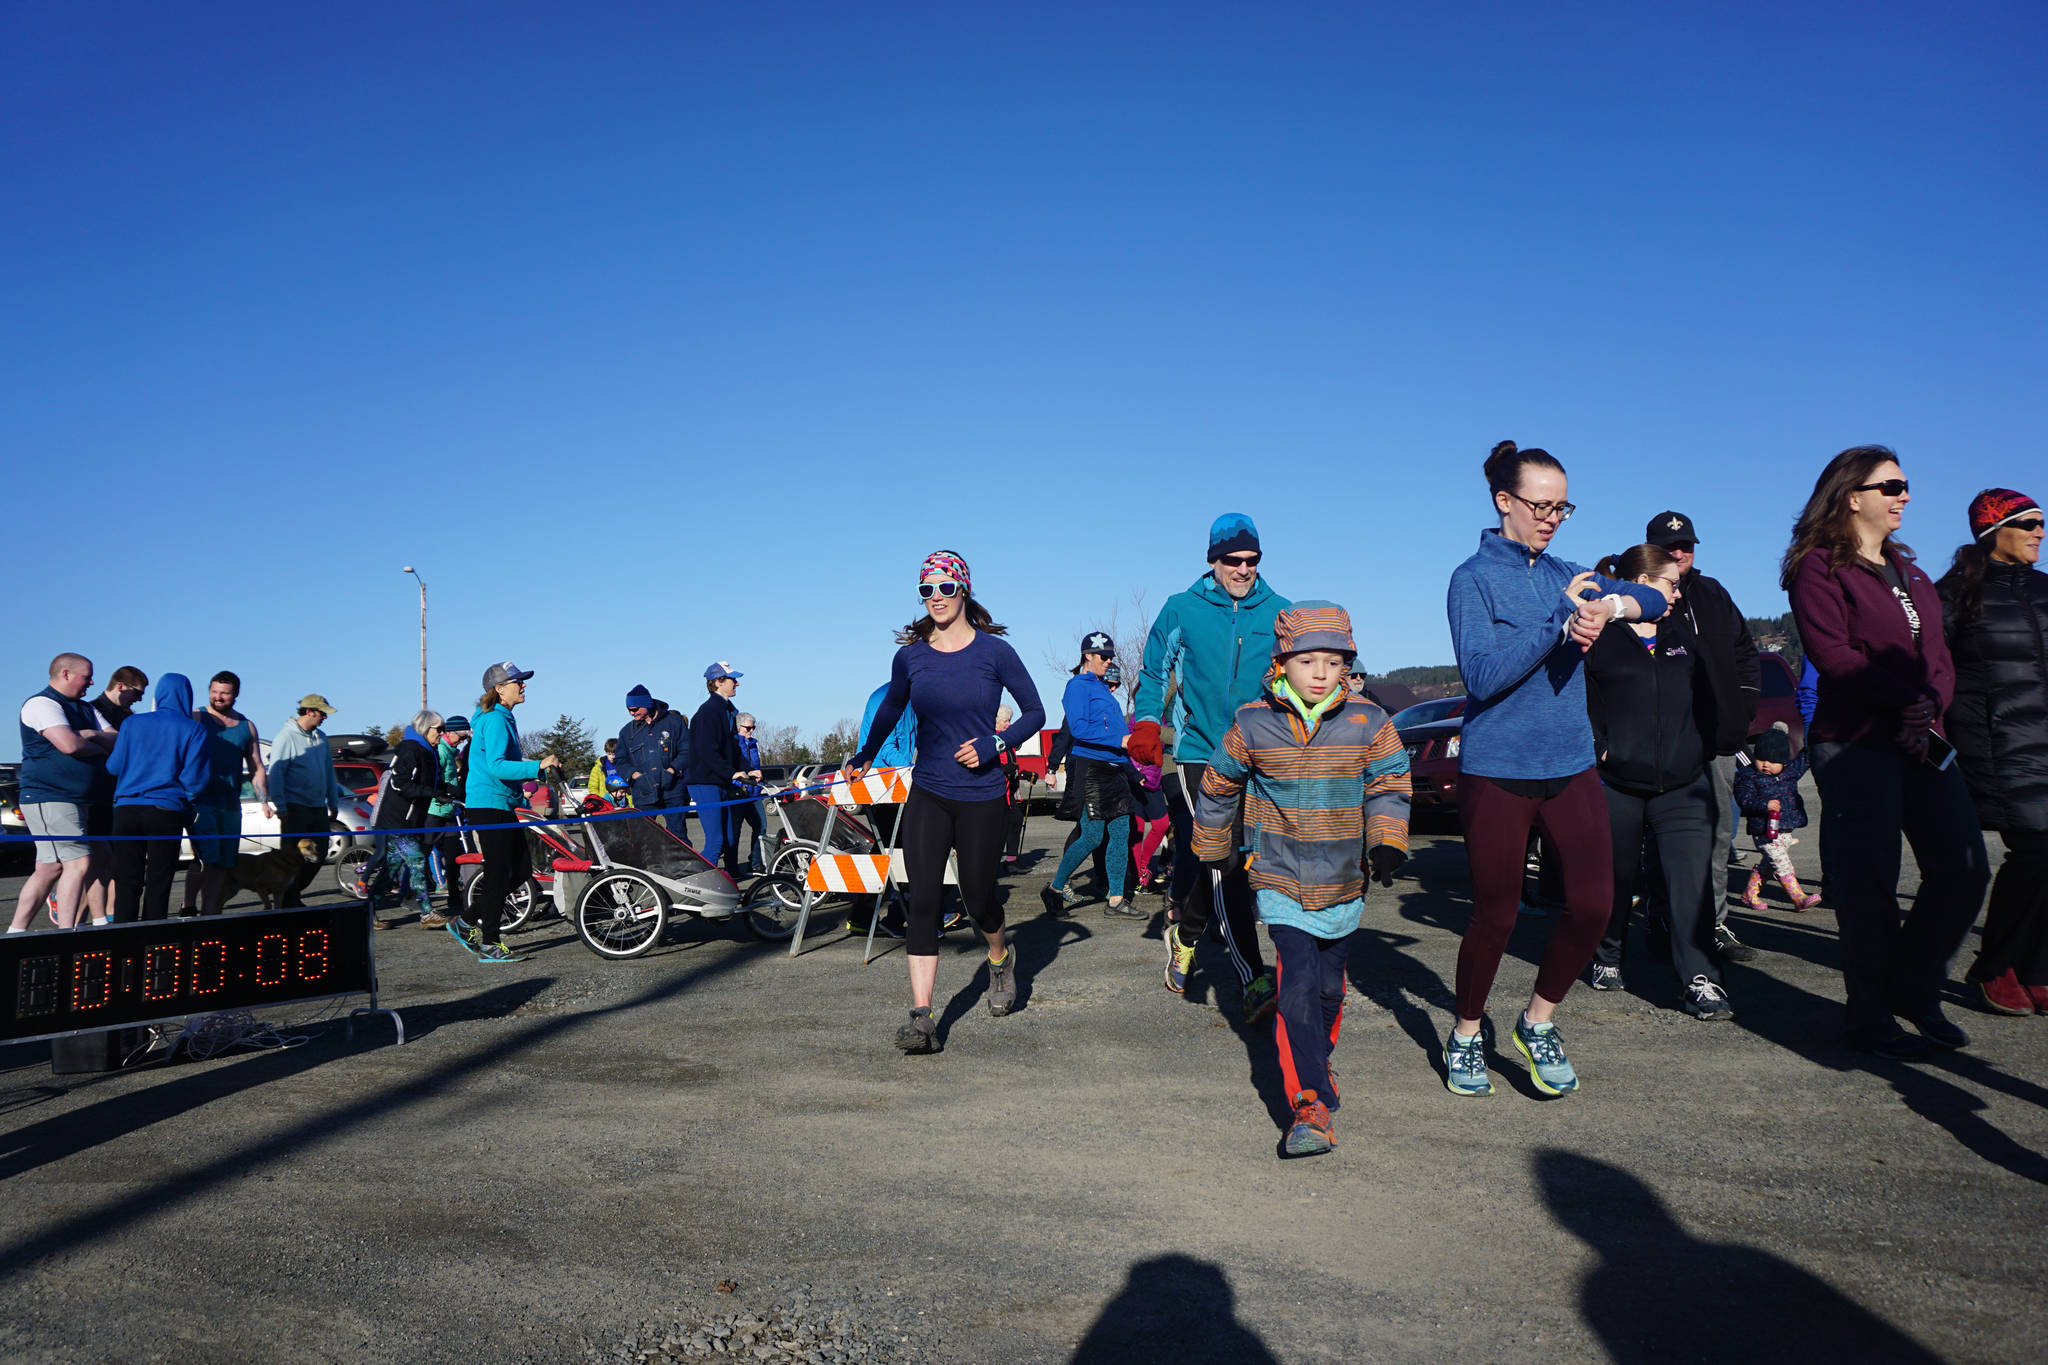 Runners and walkers participate in the Blue Line Run in Homer, Alaska, on March 30, 2019. They moved along the blue line, or the line marking the top of the 50-foot high inundation zone in the event of a tsunami. (Photo provided)